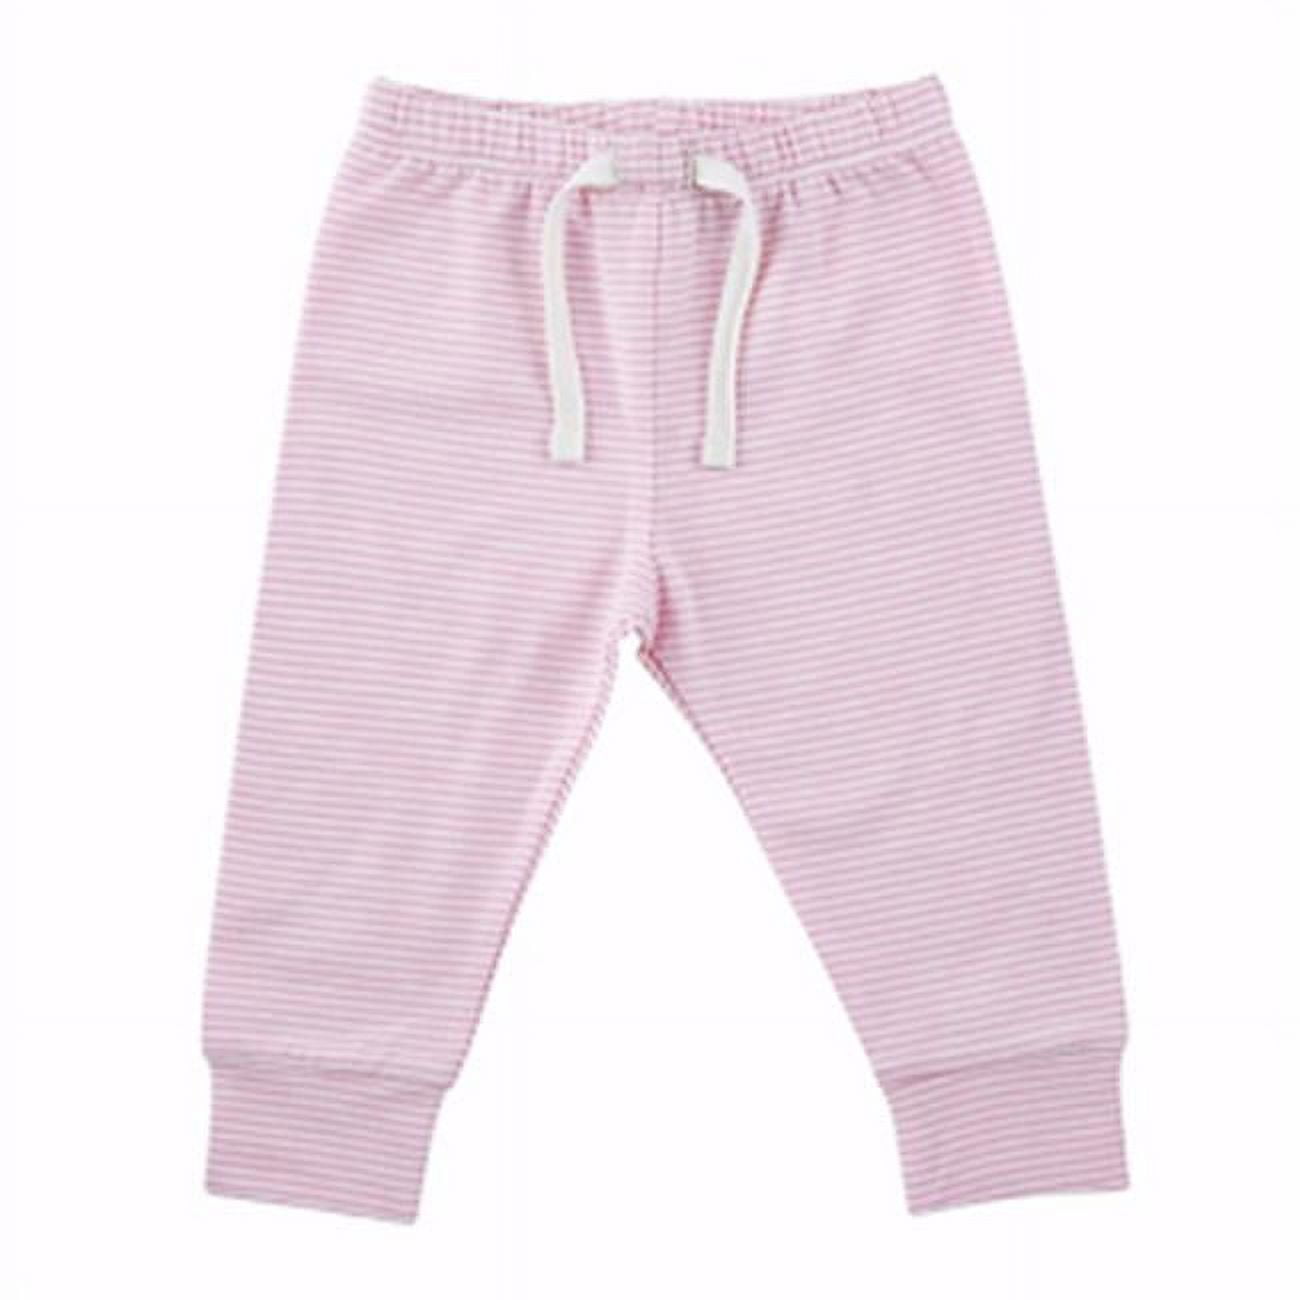 Picture of Stephan Baby 137189 0-3 Months Baby-Pants - Cream &amp; PinkPack of 2